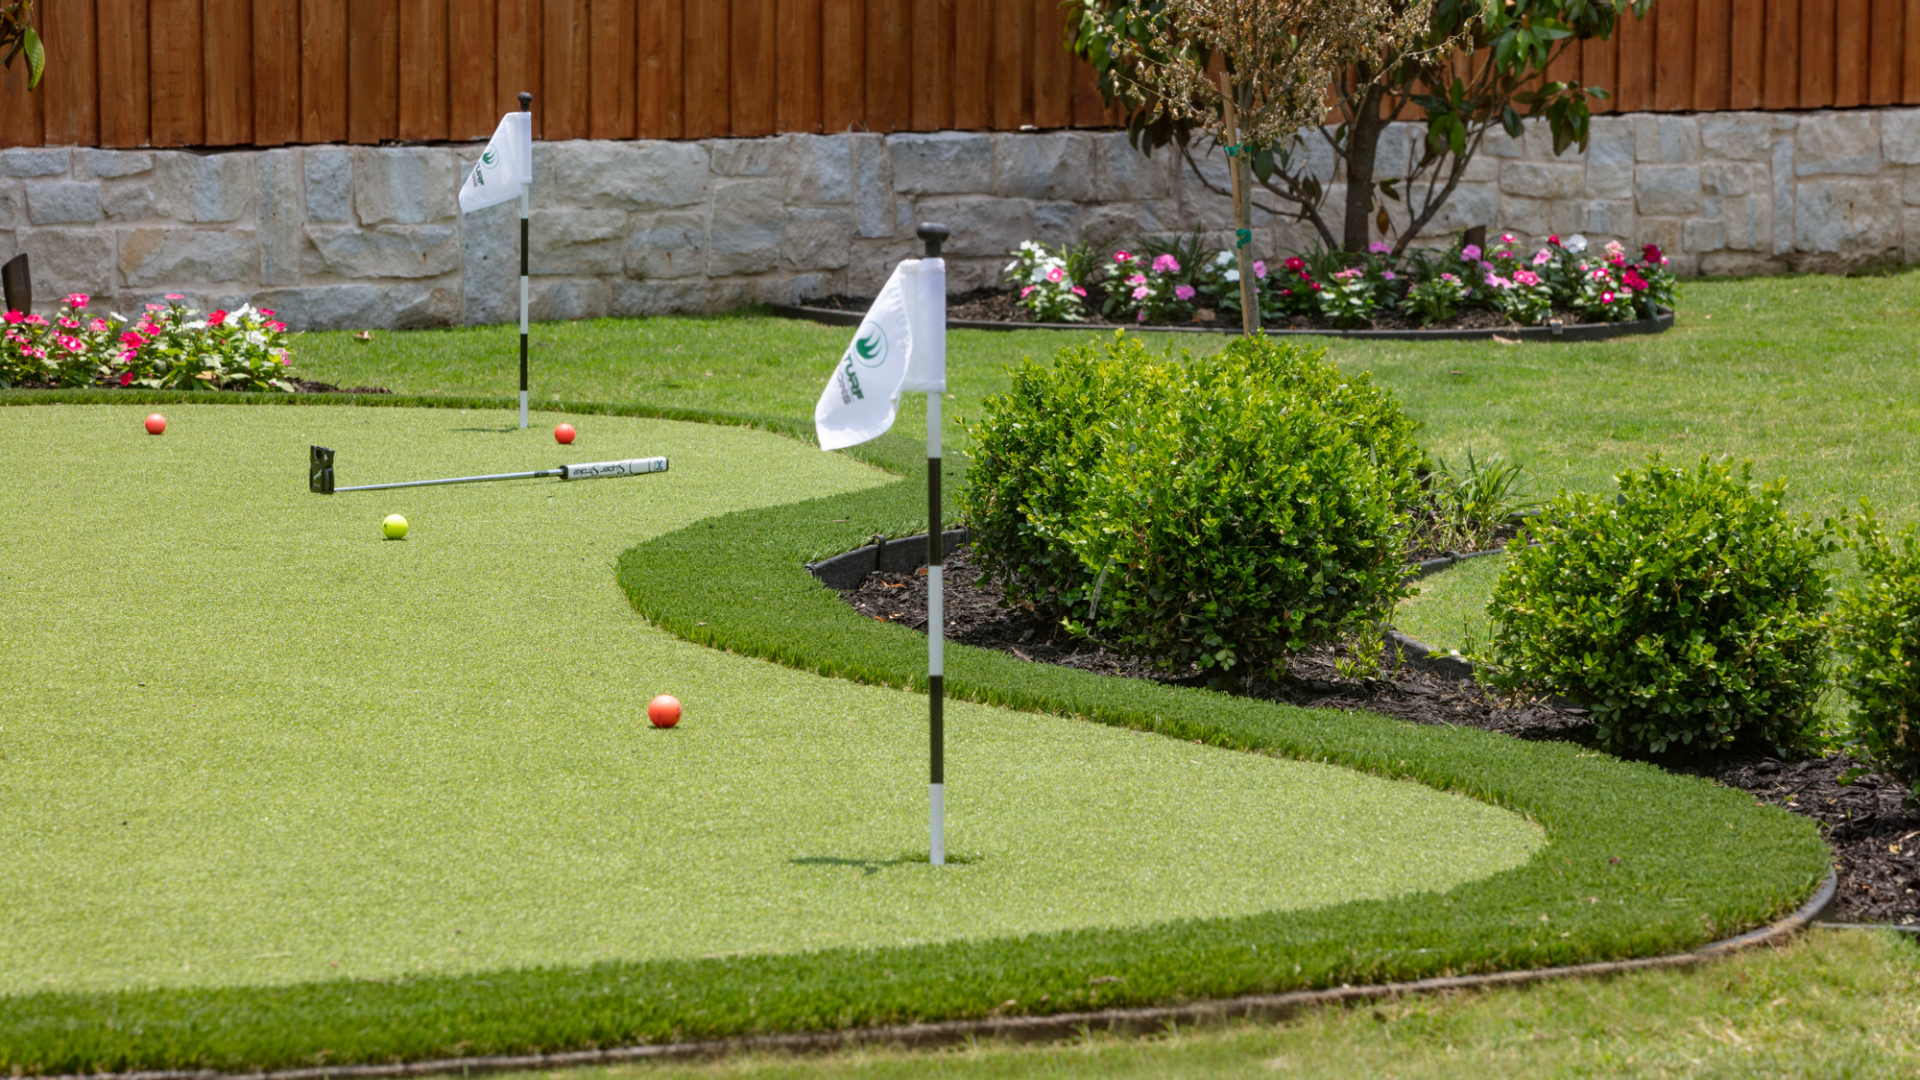 synthetic turf for golf in backyard